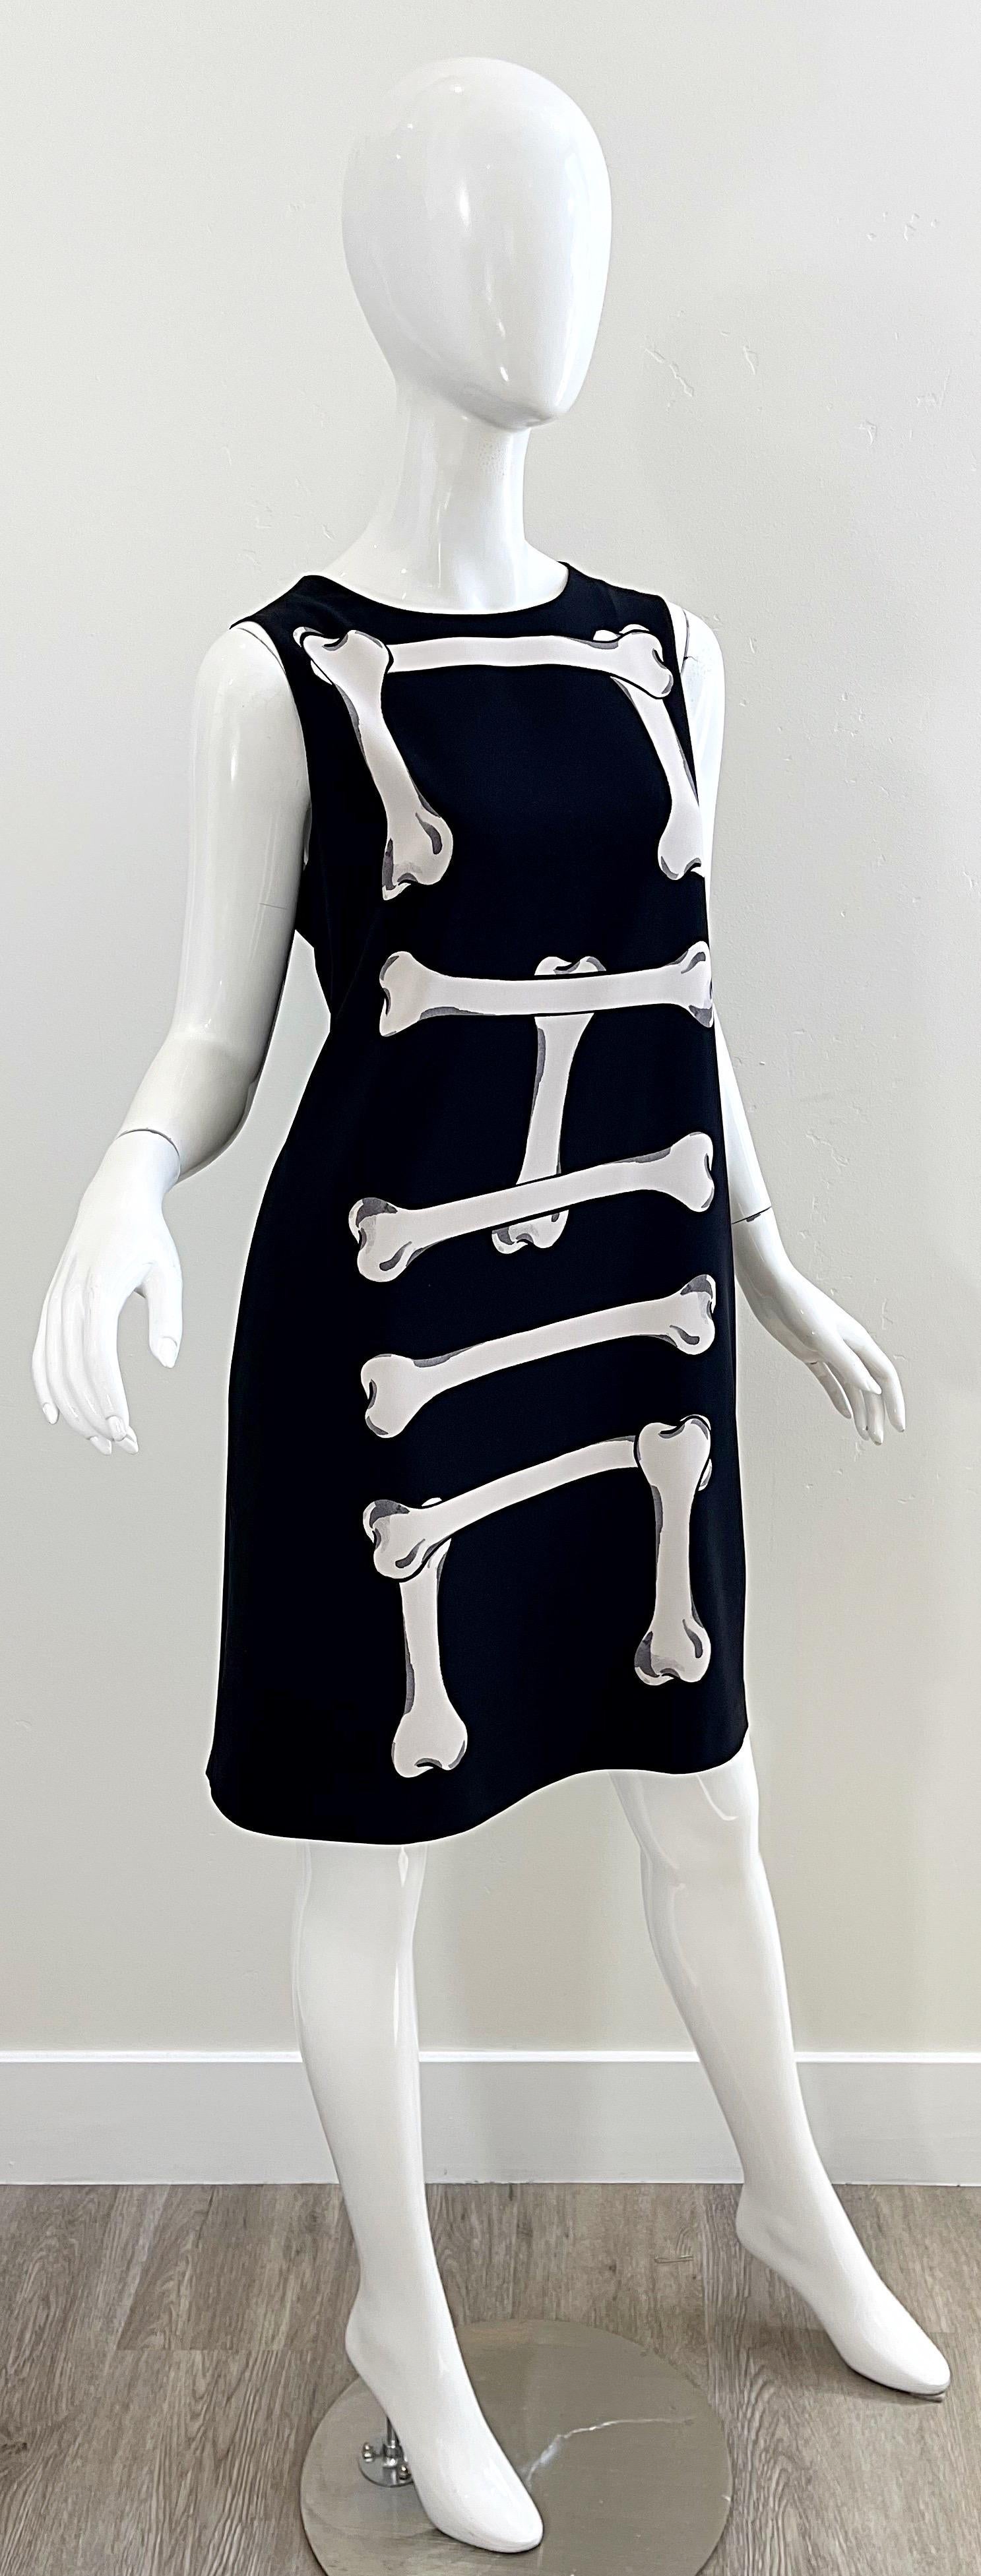 Moschino Cheap & Chic 2000s Size 10 No Bones About It Black White Skeleton Dress For Sale 3